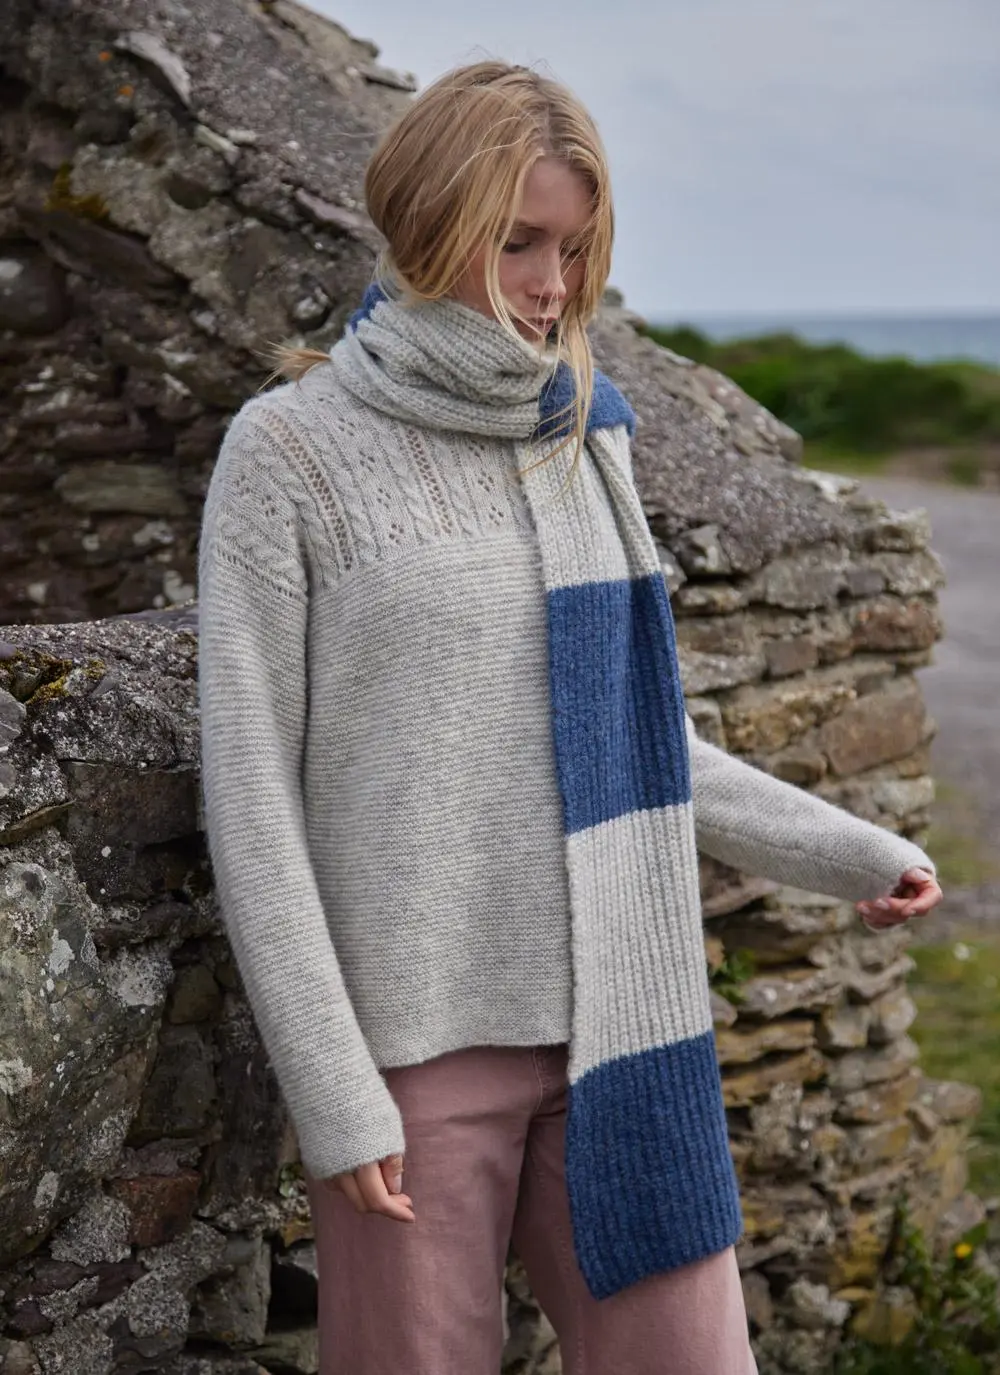 blonde woman standing near rocks wearing a large grey and blue knit scarf 